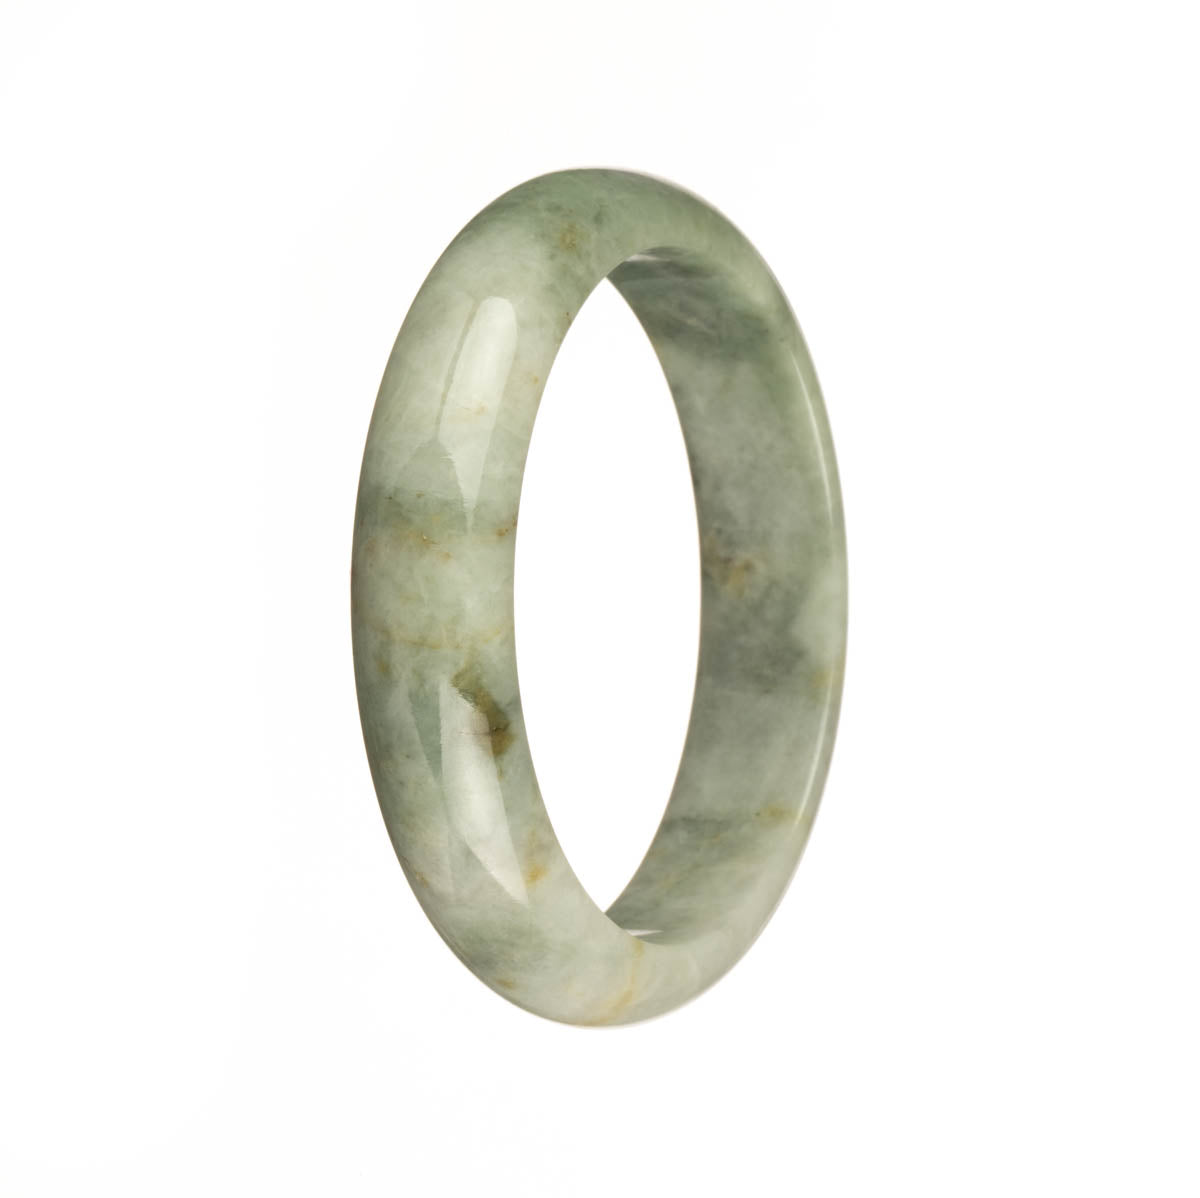 A close-up image of a jade bangle with a white base and a green pattern, showcasing its high quality and intricate design. The bangle is shaped like a half moon and has a diameter of 55mm. This exquisite piece is offered by MAYS GEMS.